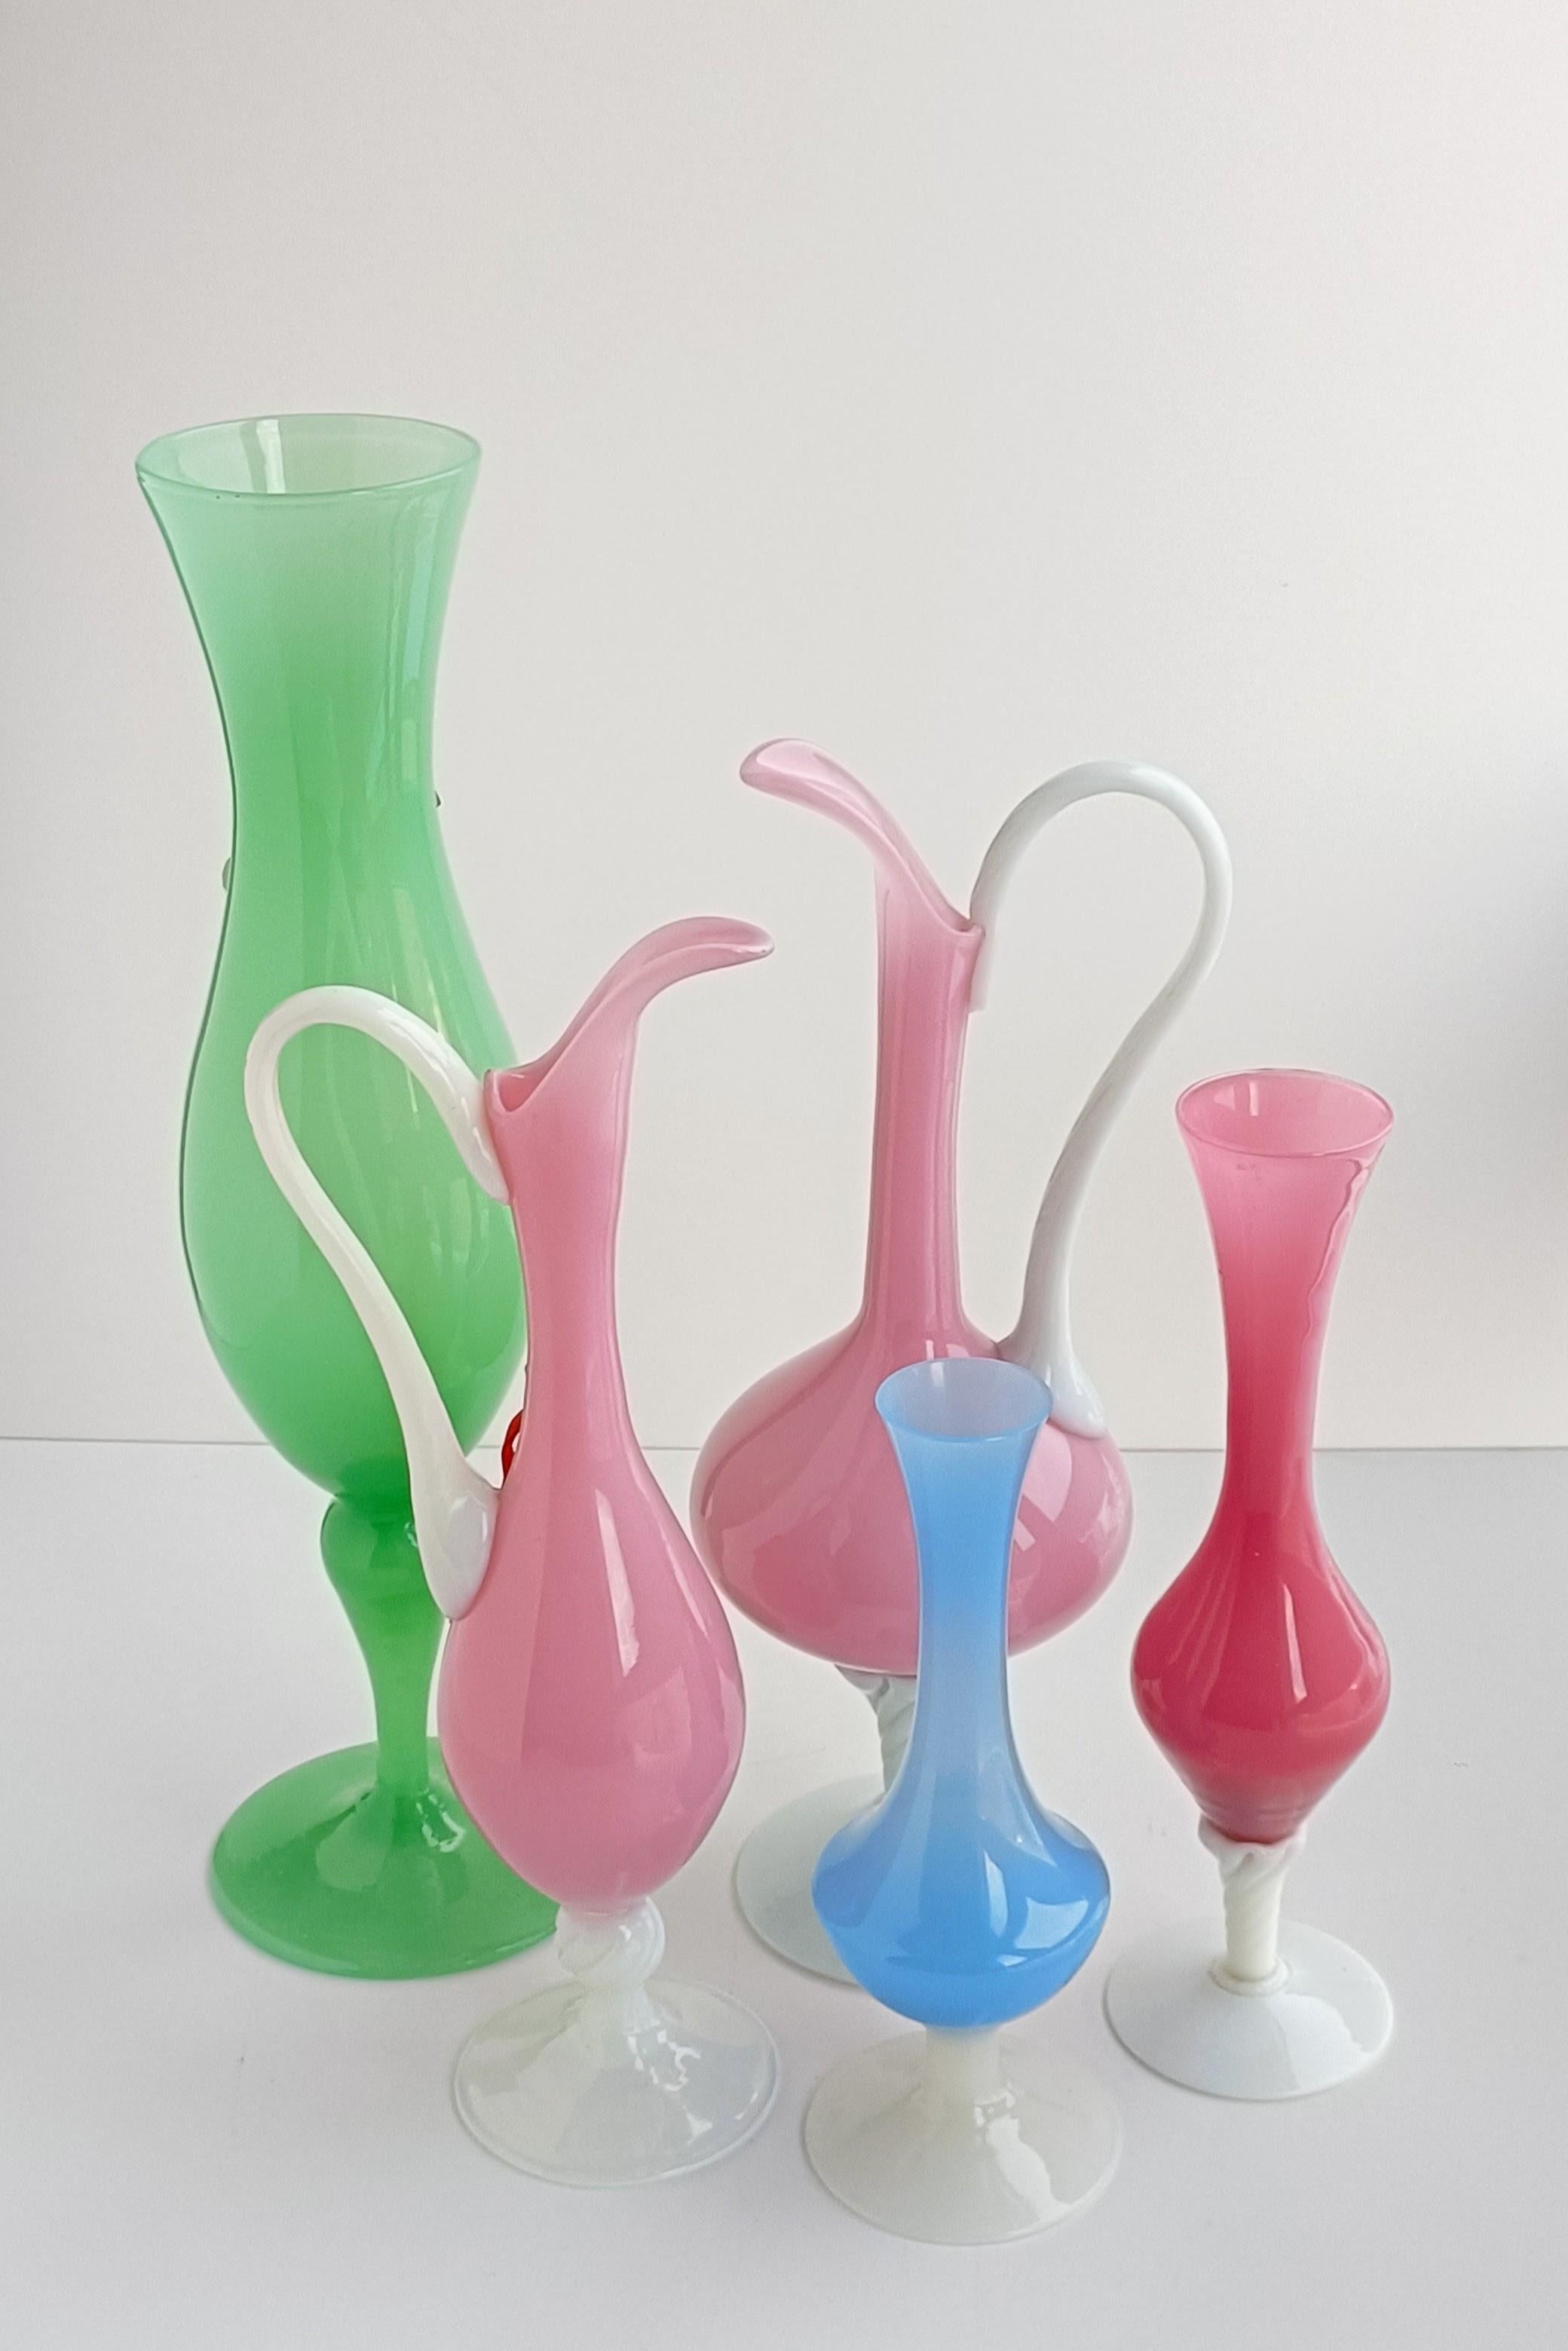 Empoli Glass Opaline Florence Set of Vases, Italy, 1950s.  In Excellent Condition For Sale In Valencia, VC